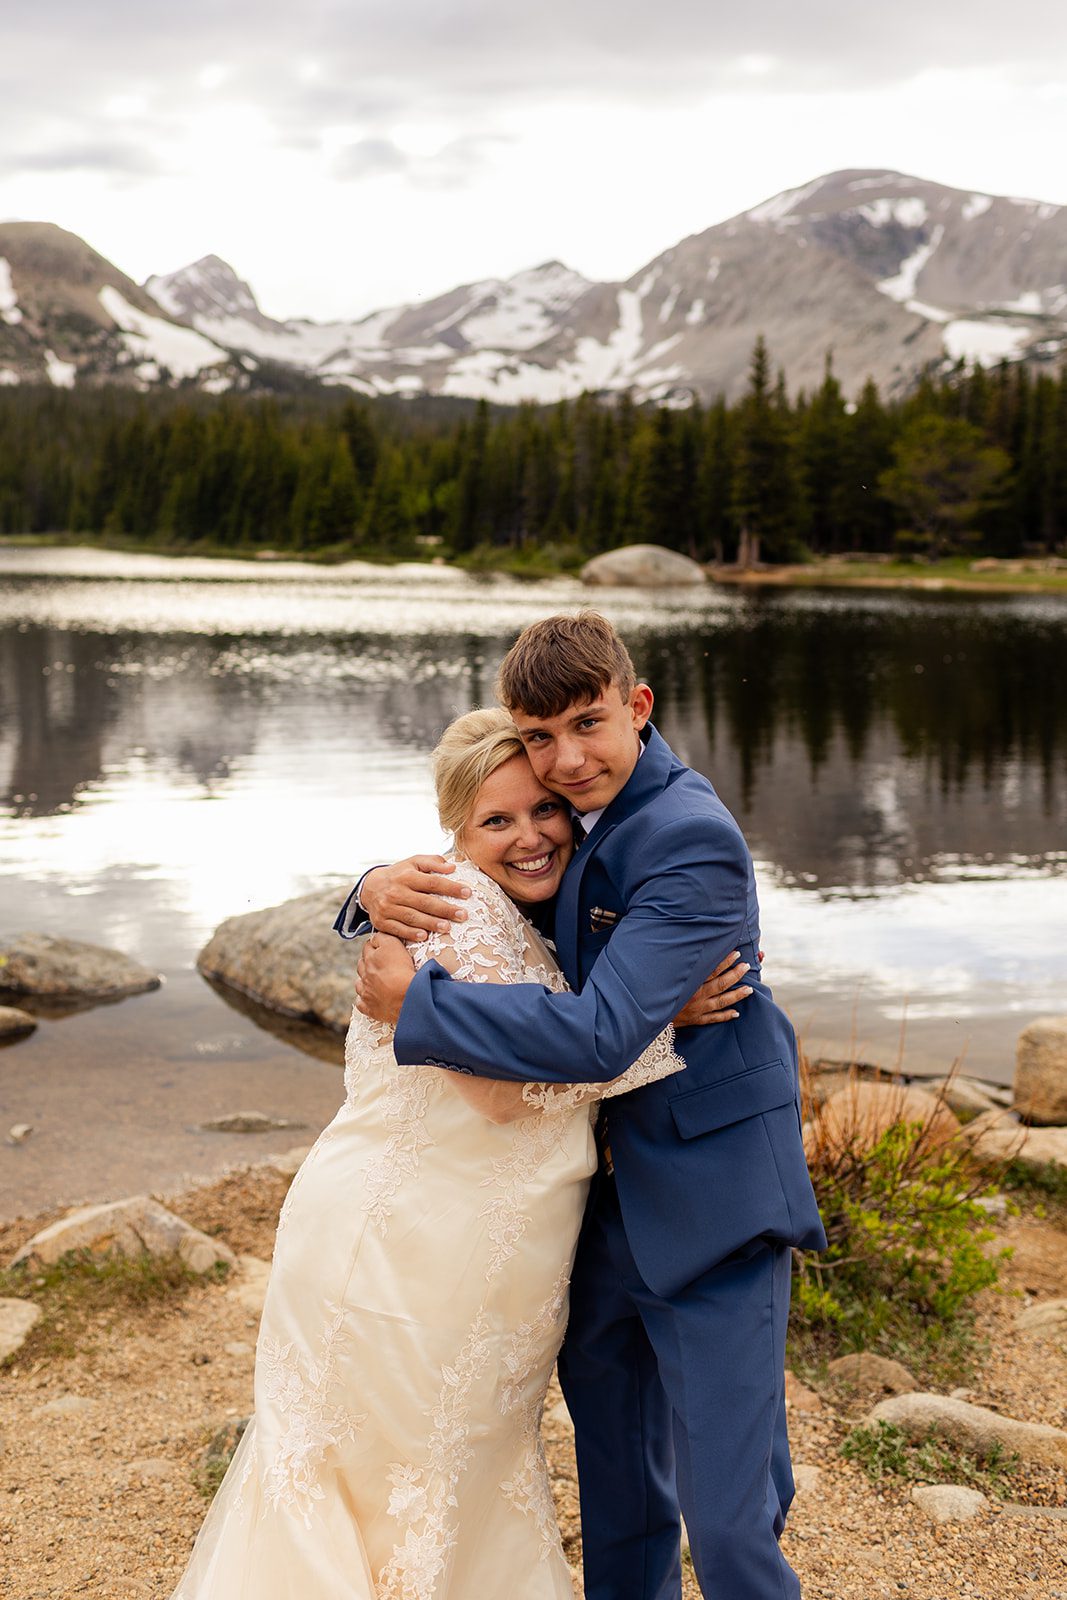 The bride and her son after her Brainard Lake wedding ceremony.